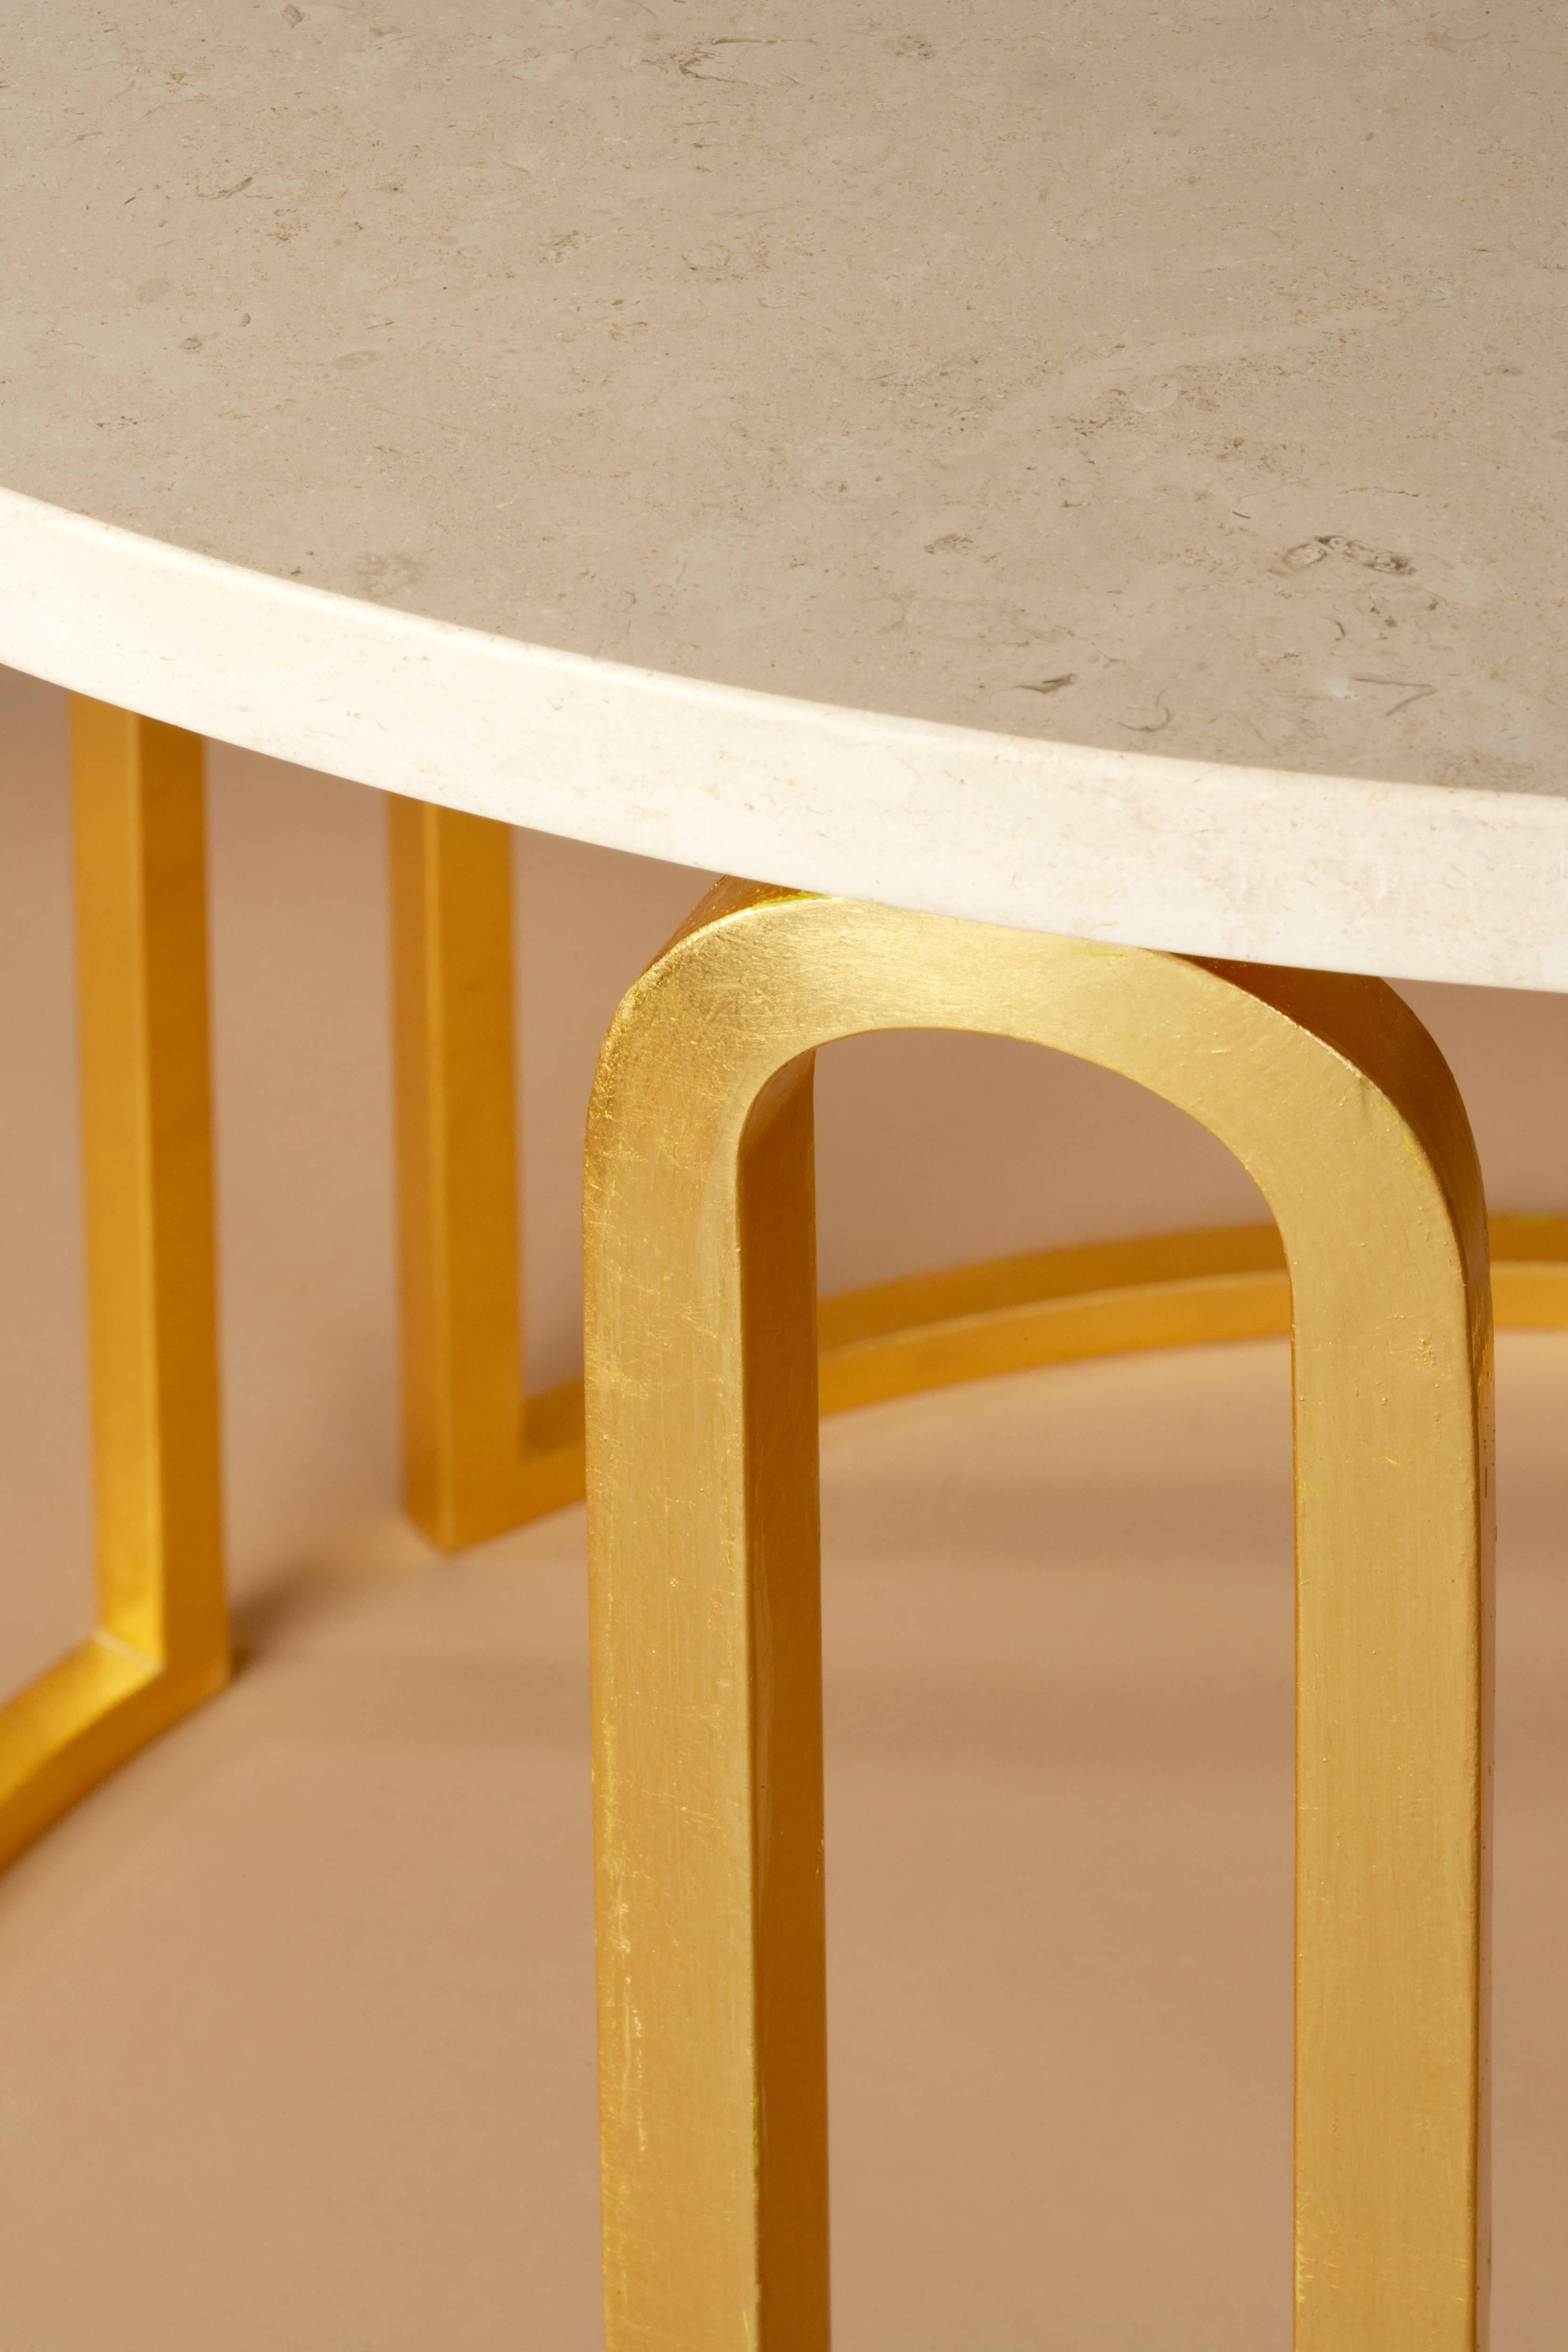 Rhodes' silky smooth, travertine top is supported by a 24 karat gold leaf covered base, which is forged into three perfectly proportioned arches from a single piece of steel. This exquisite table is a perfect example of the Nicolas Aubagnac’s